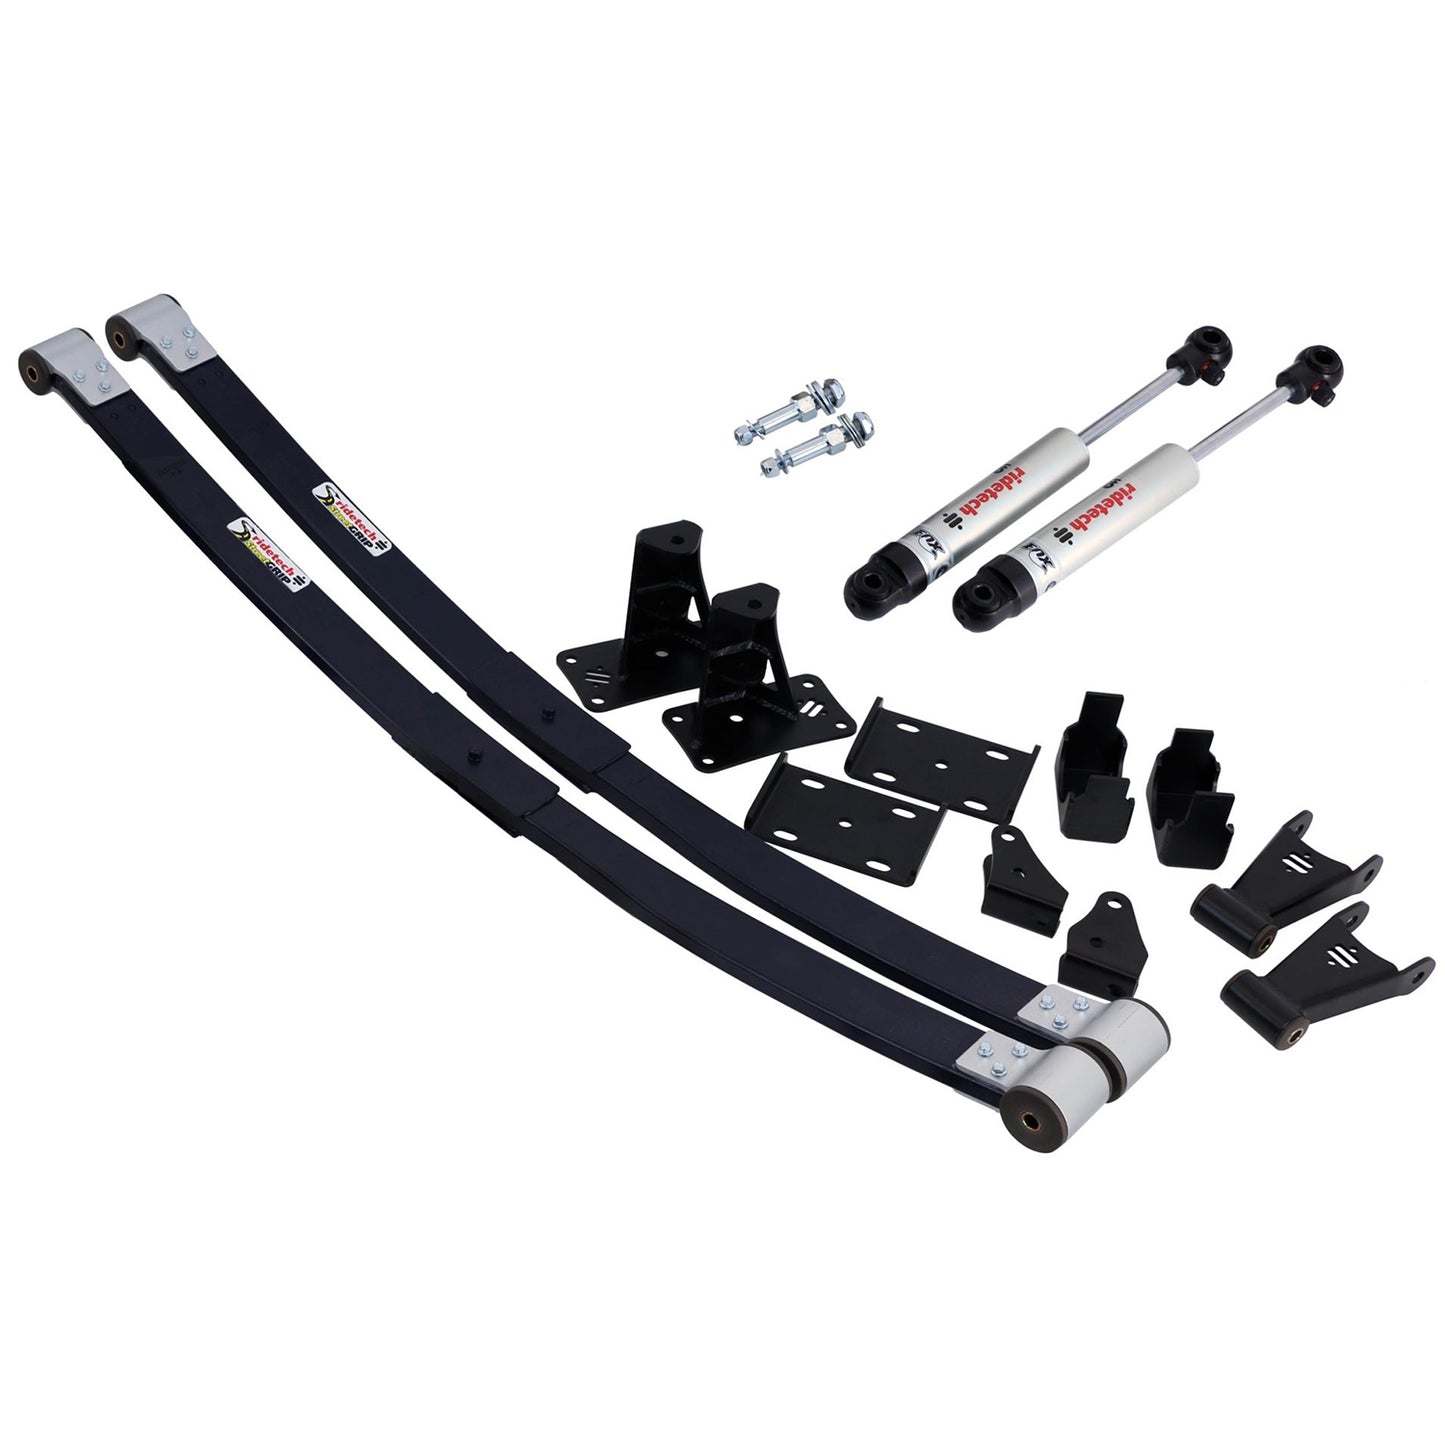 Ridetech Composite leaf springs and HQ shocks for 1973-1987 C10. 11364810